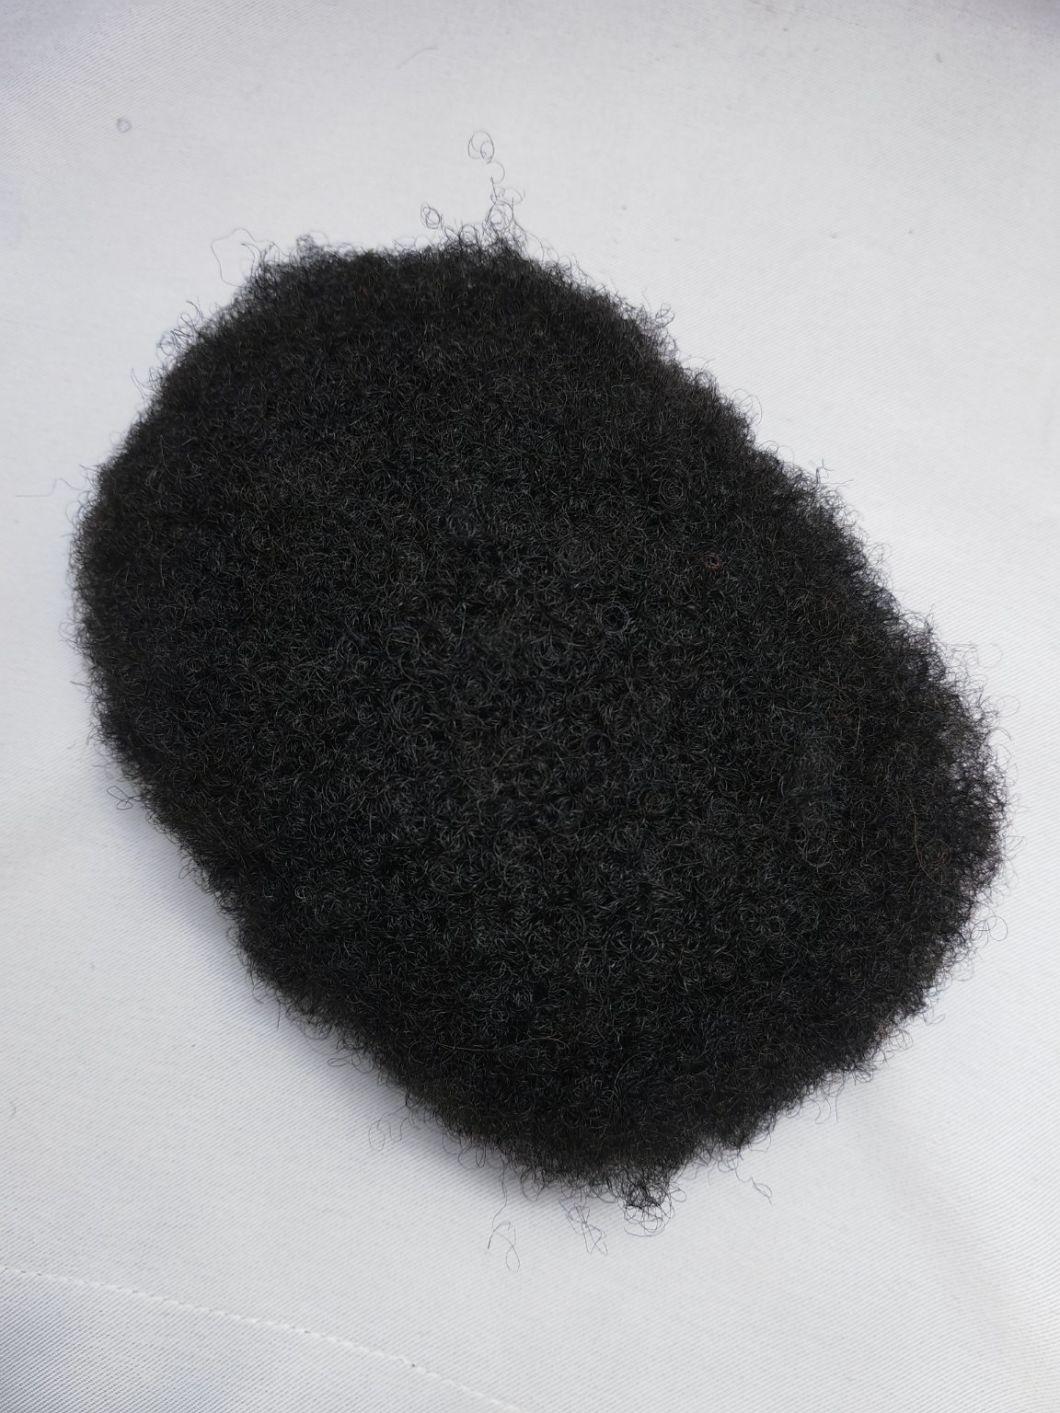 2022 Best Custom Made Comfortable Fine Mono Base Human Hair Toupee Made of Remy Human Hair